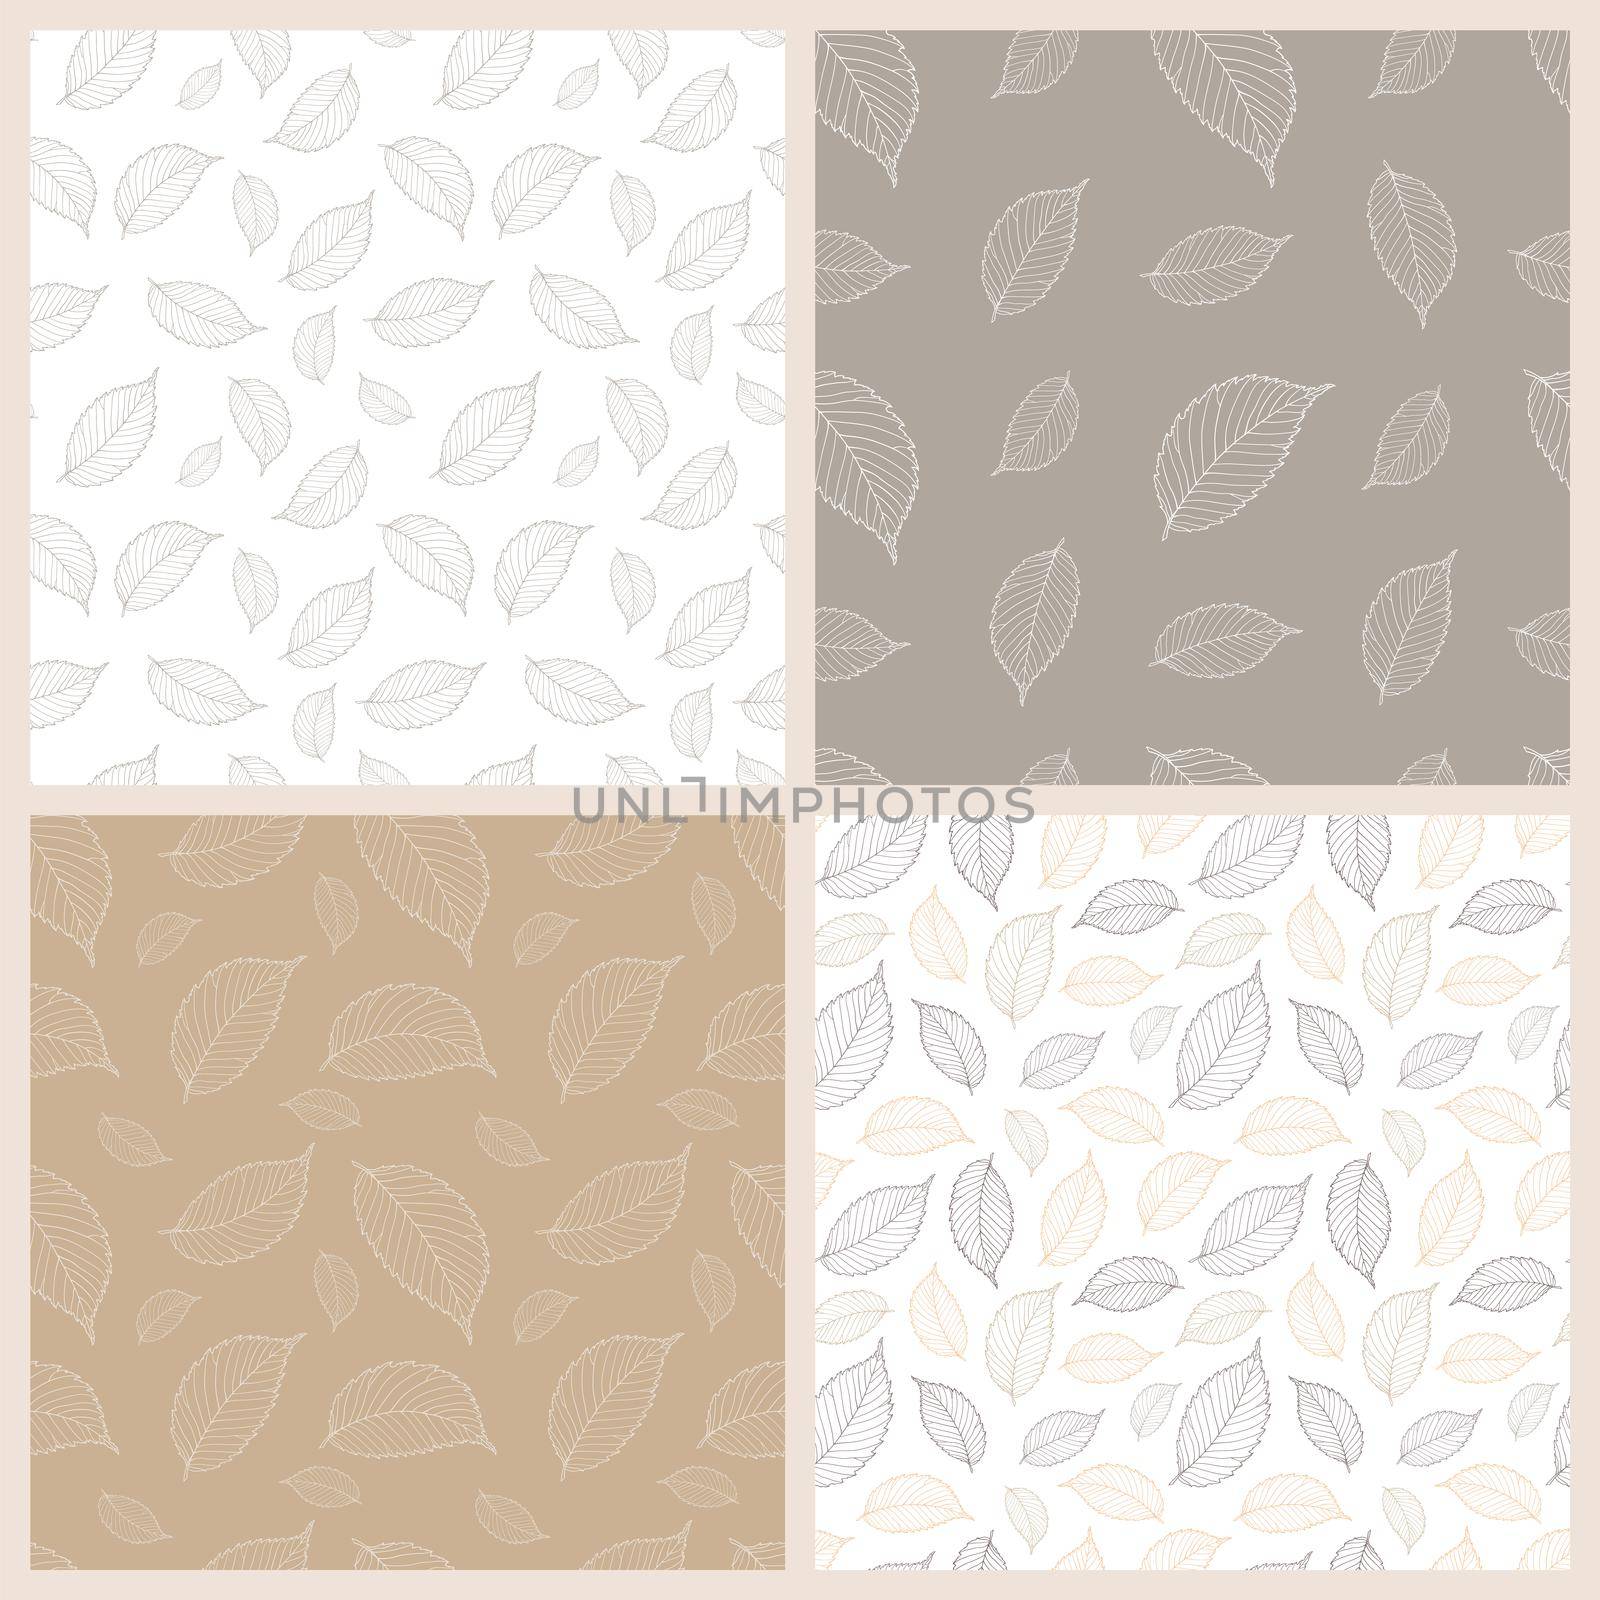 Autumn leaves set of seamless patterns. Contour drawing of autumn leaves. Pestle palette. Vector illustration. Suitable for fabric, wrapping paper, wallpaper, etc.